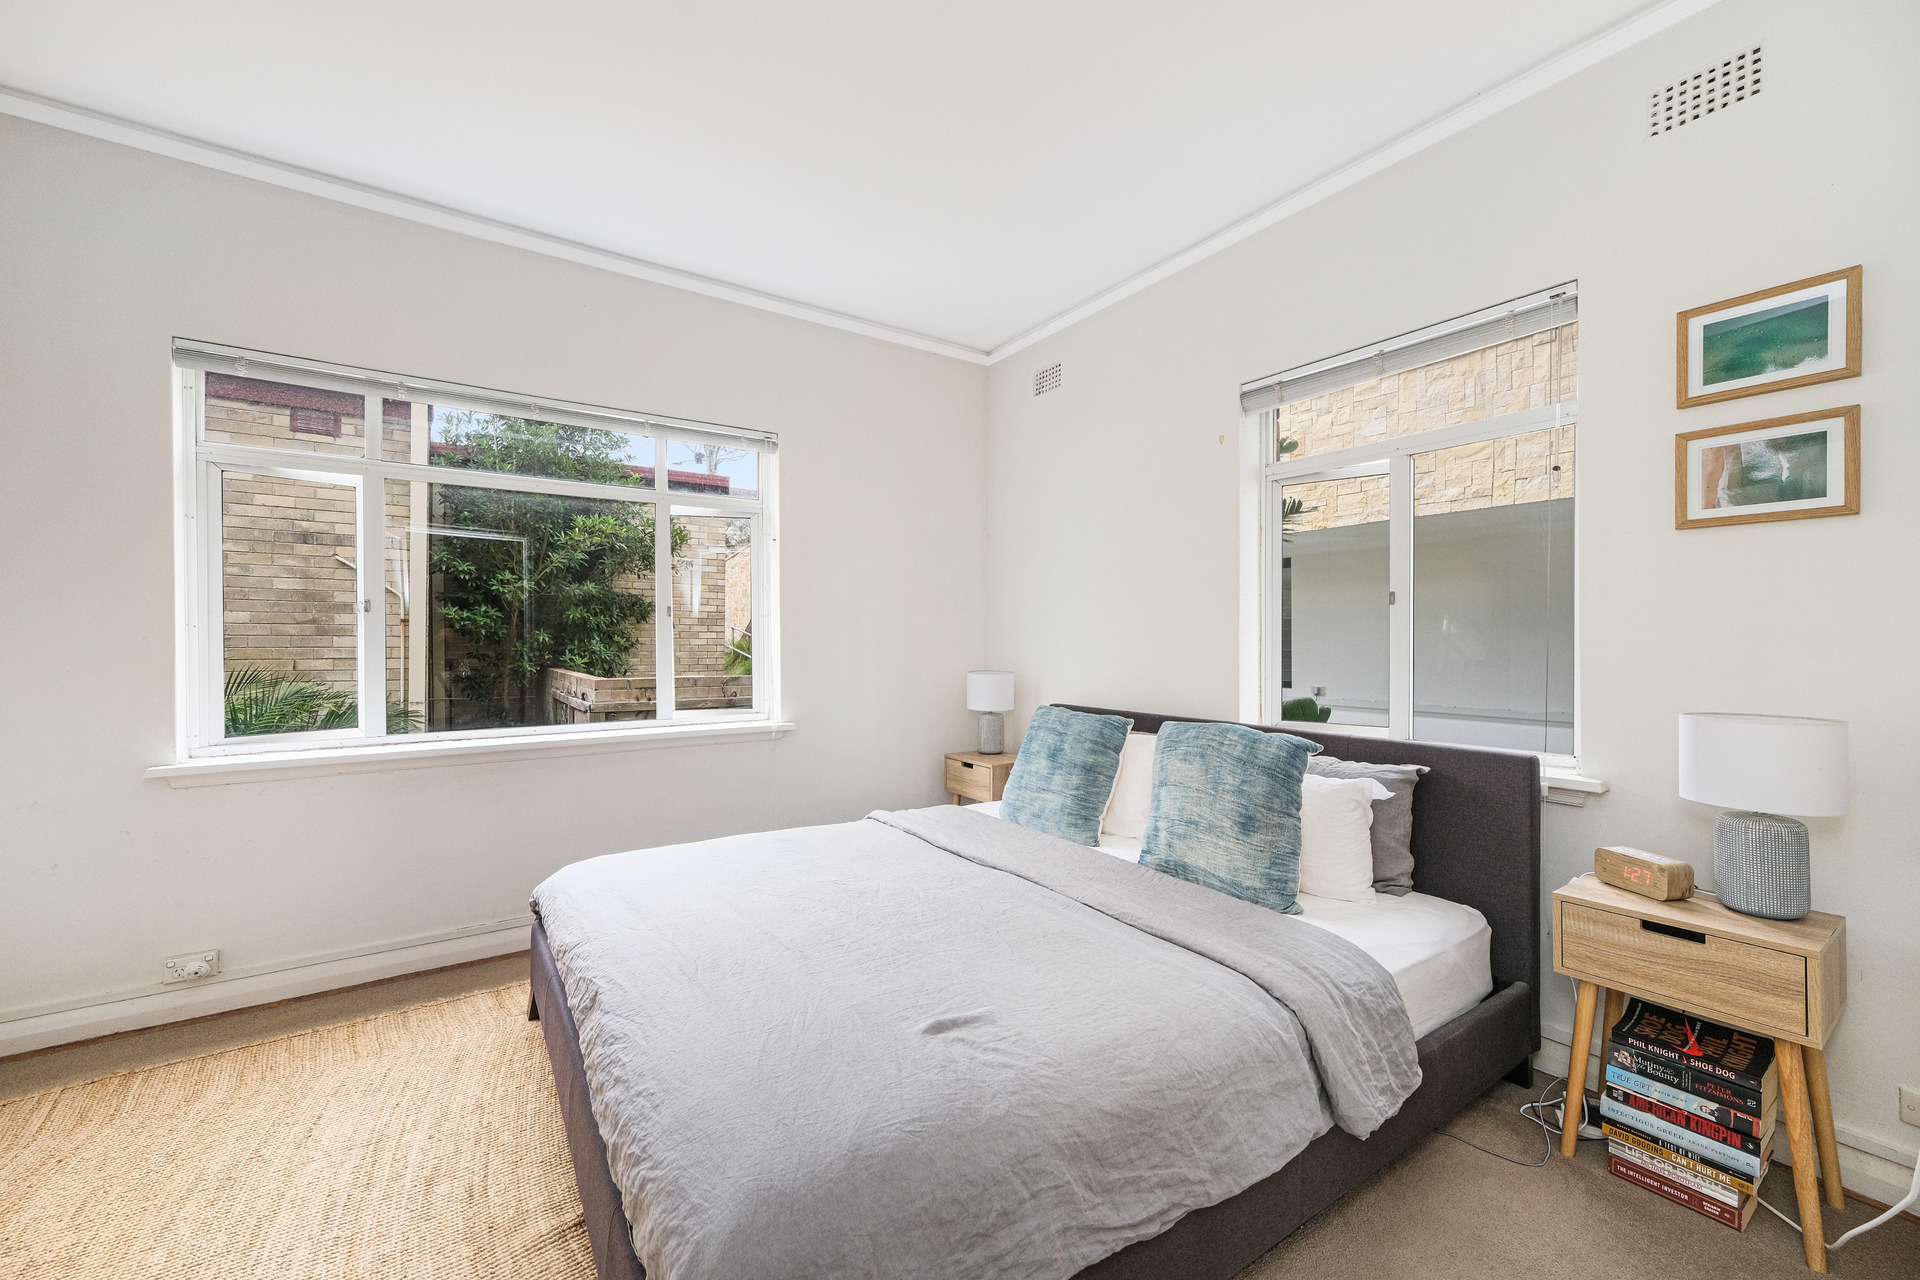 Leased Unit 10/24 Cove Avenue, Manly NSW 2095 - Jun 18, 2022 - Homely